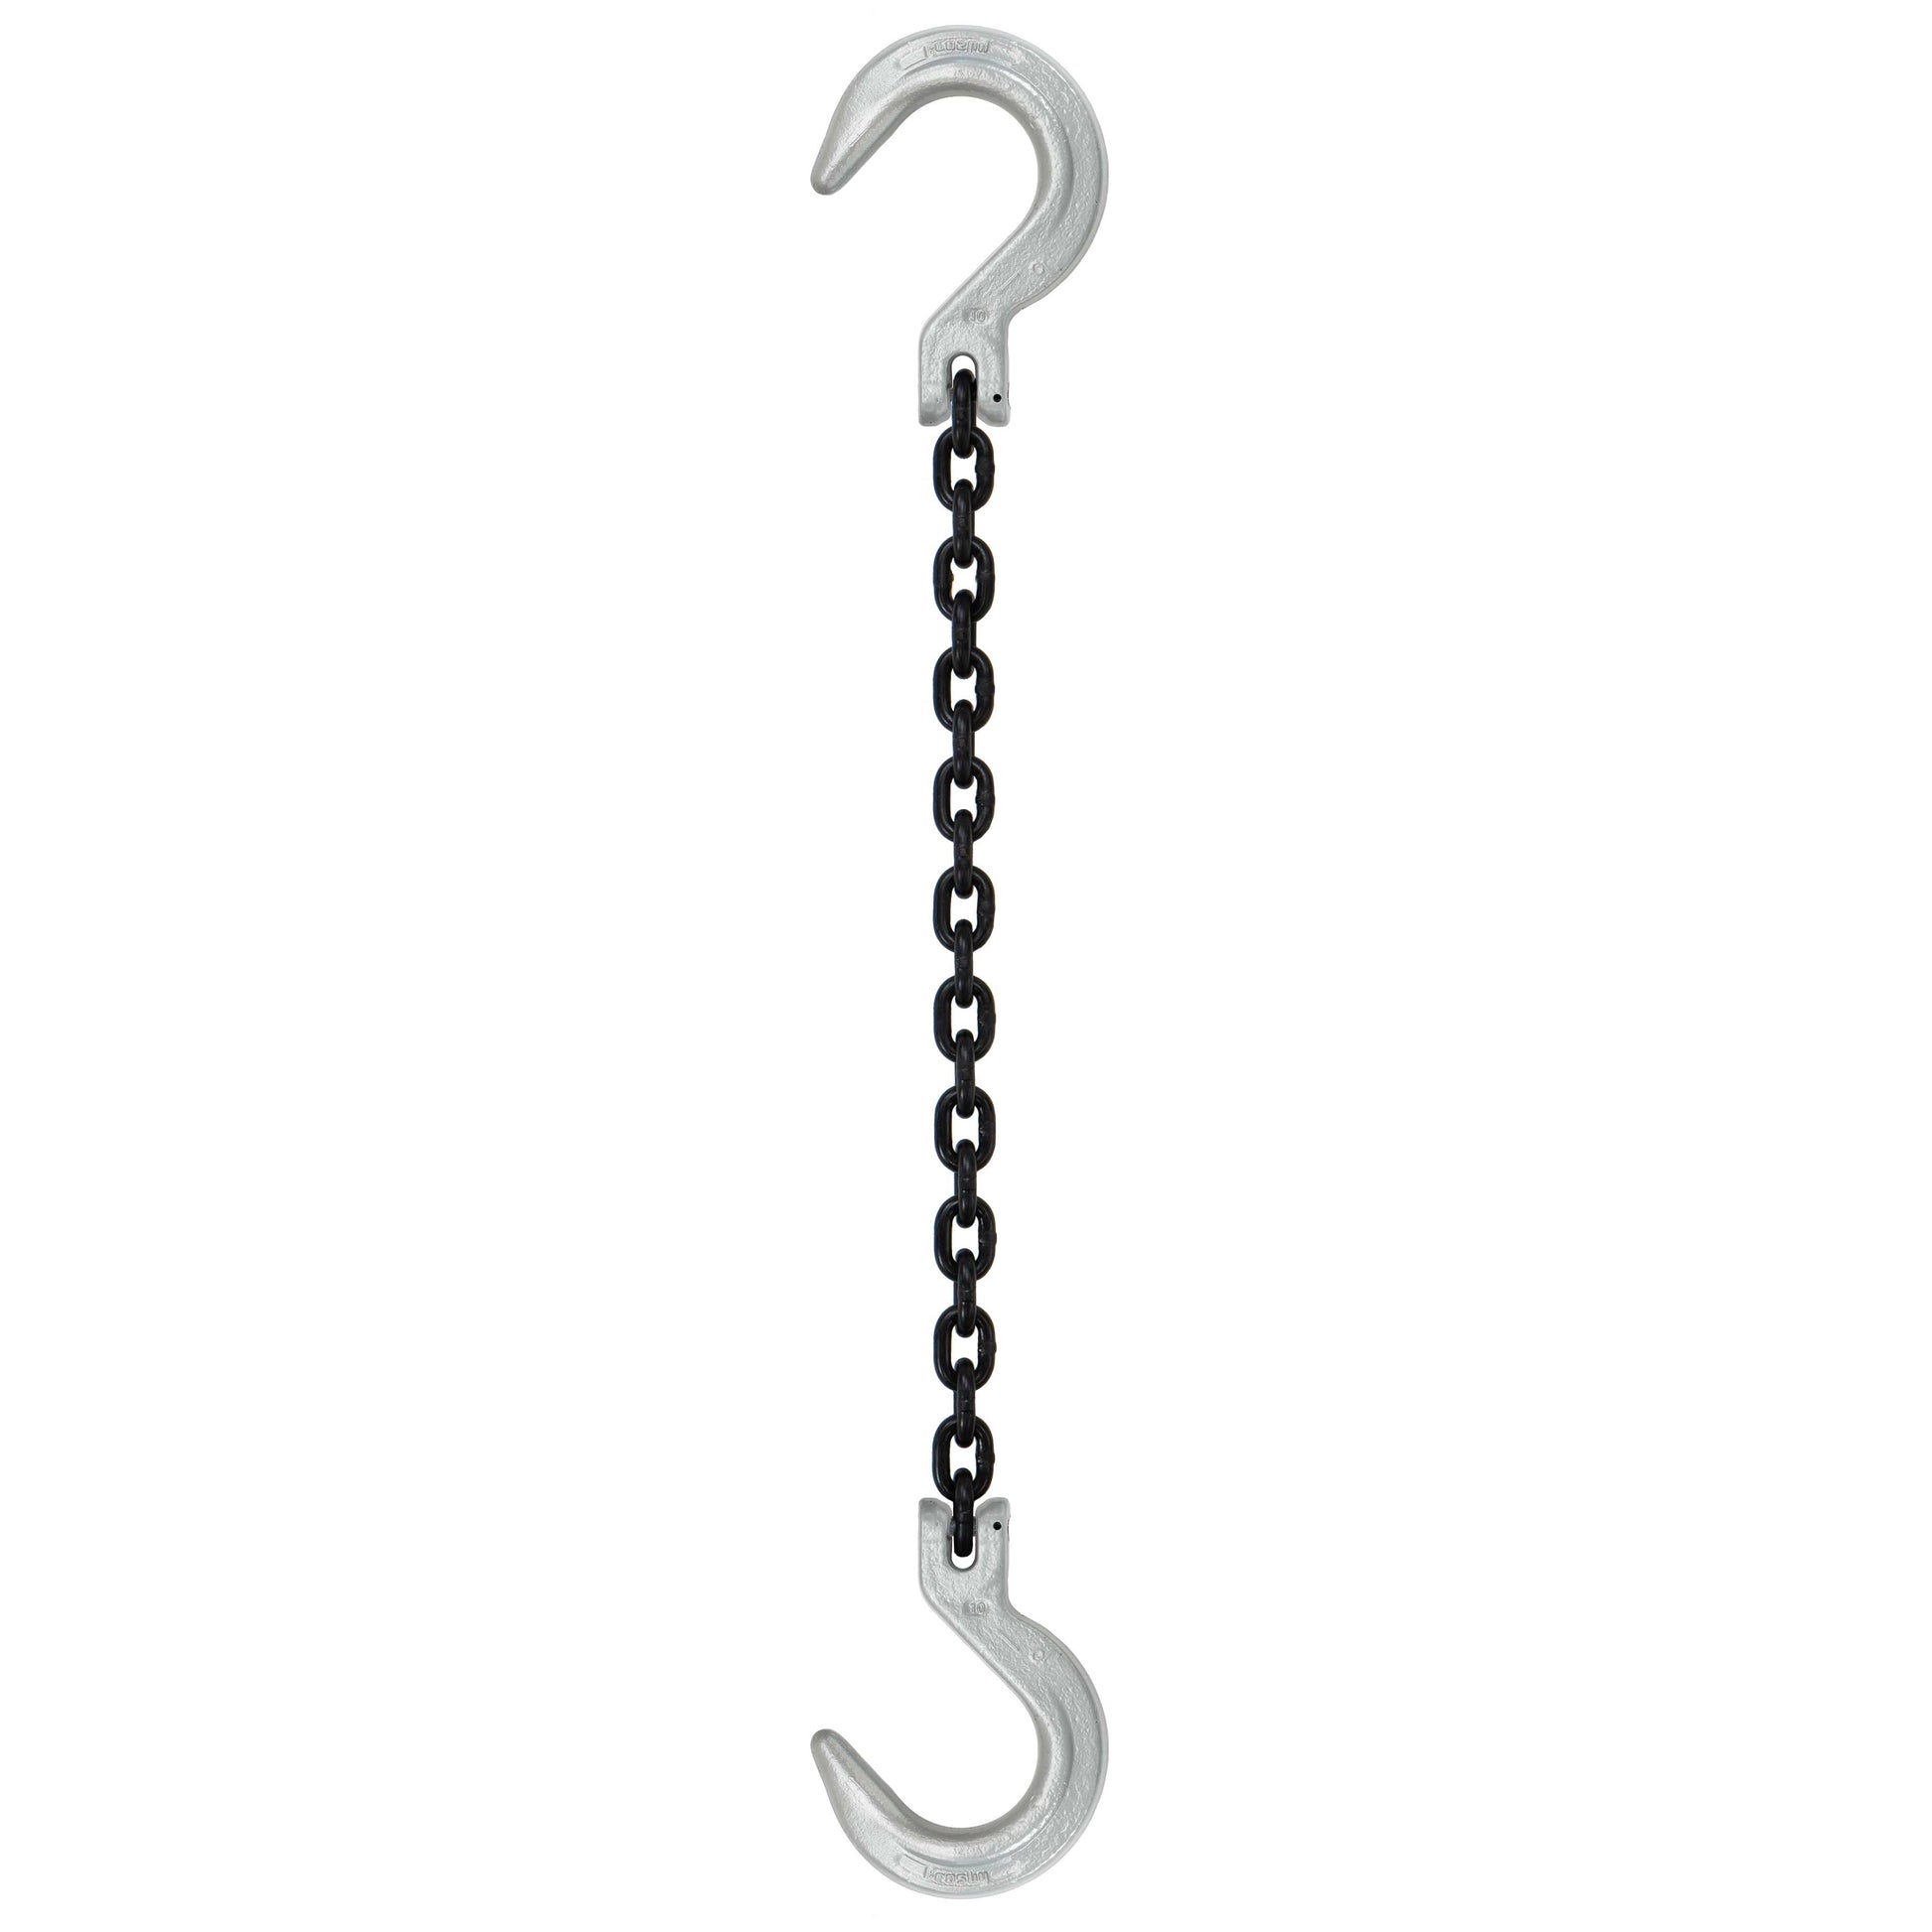 38 inch x 18 foot Domestic Single Leg Chain Sling w Crosby Foundry & Foundry Hooks Grade 100 image 1 of 2